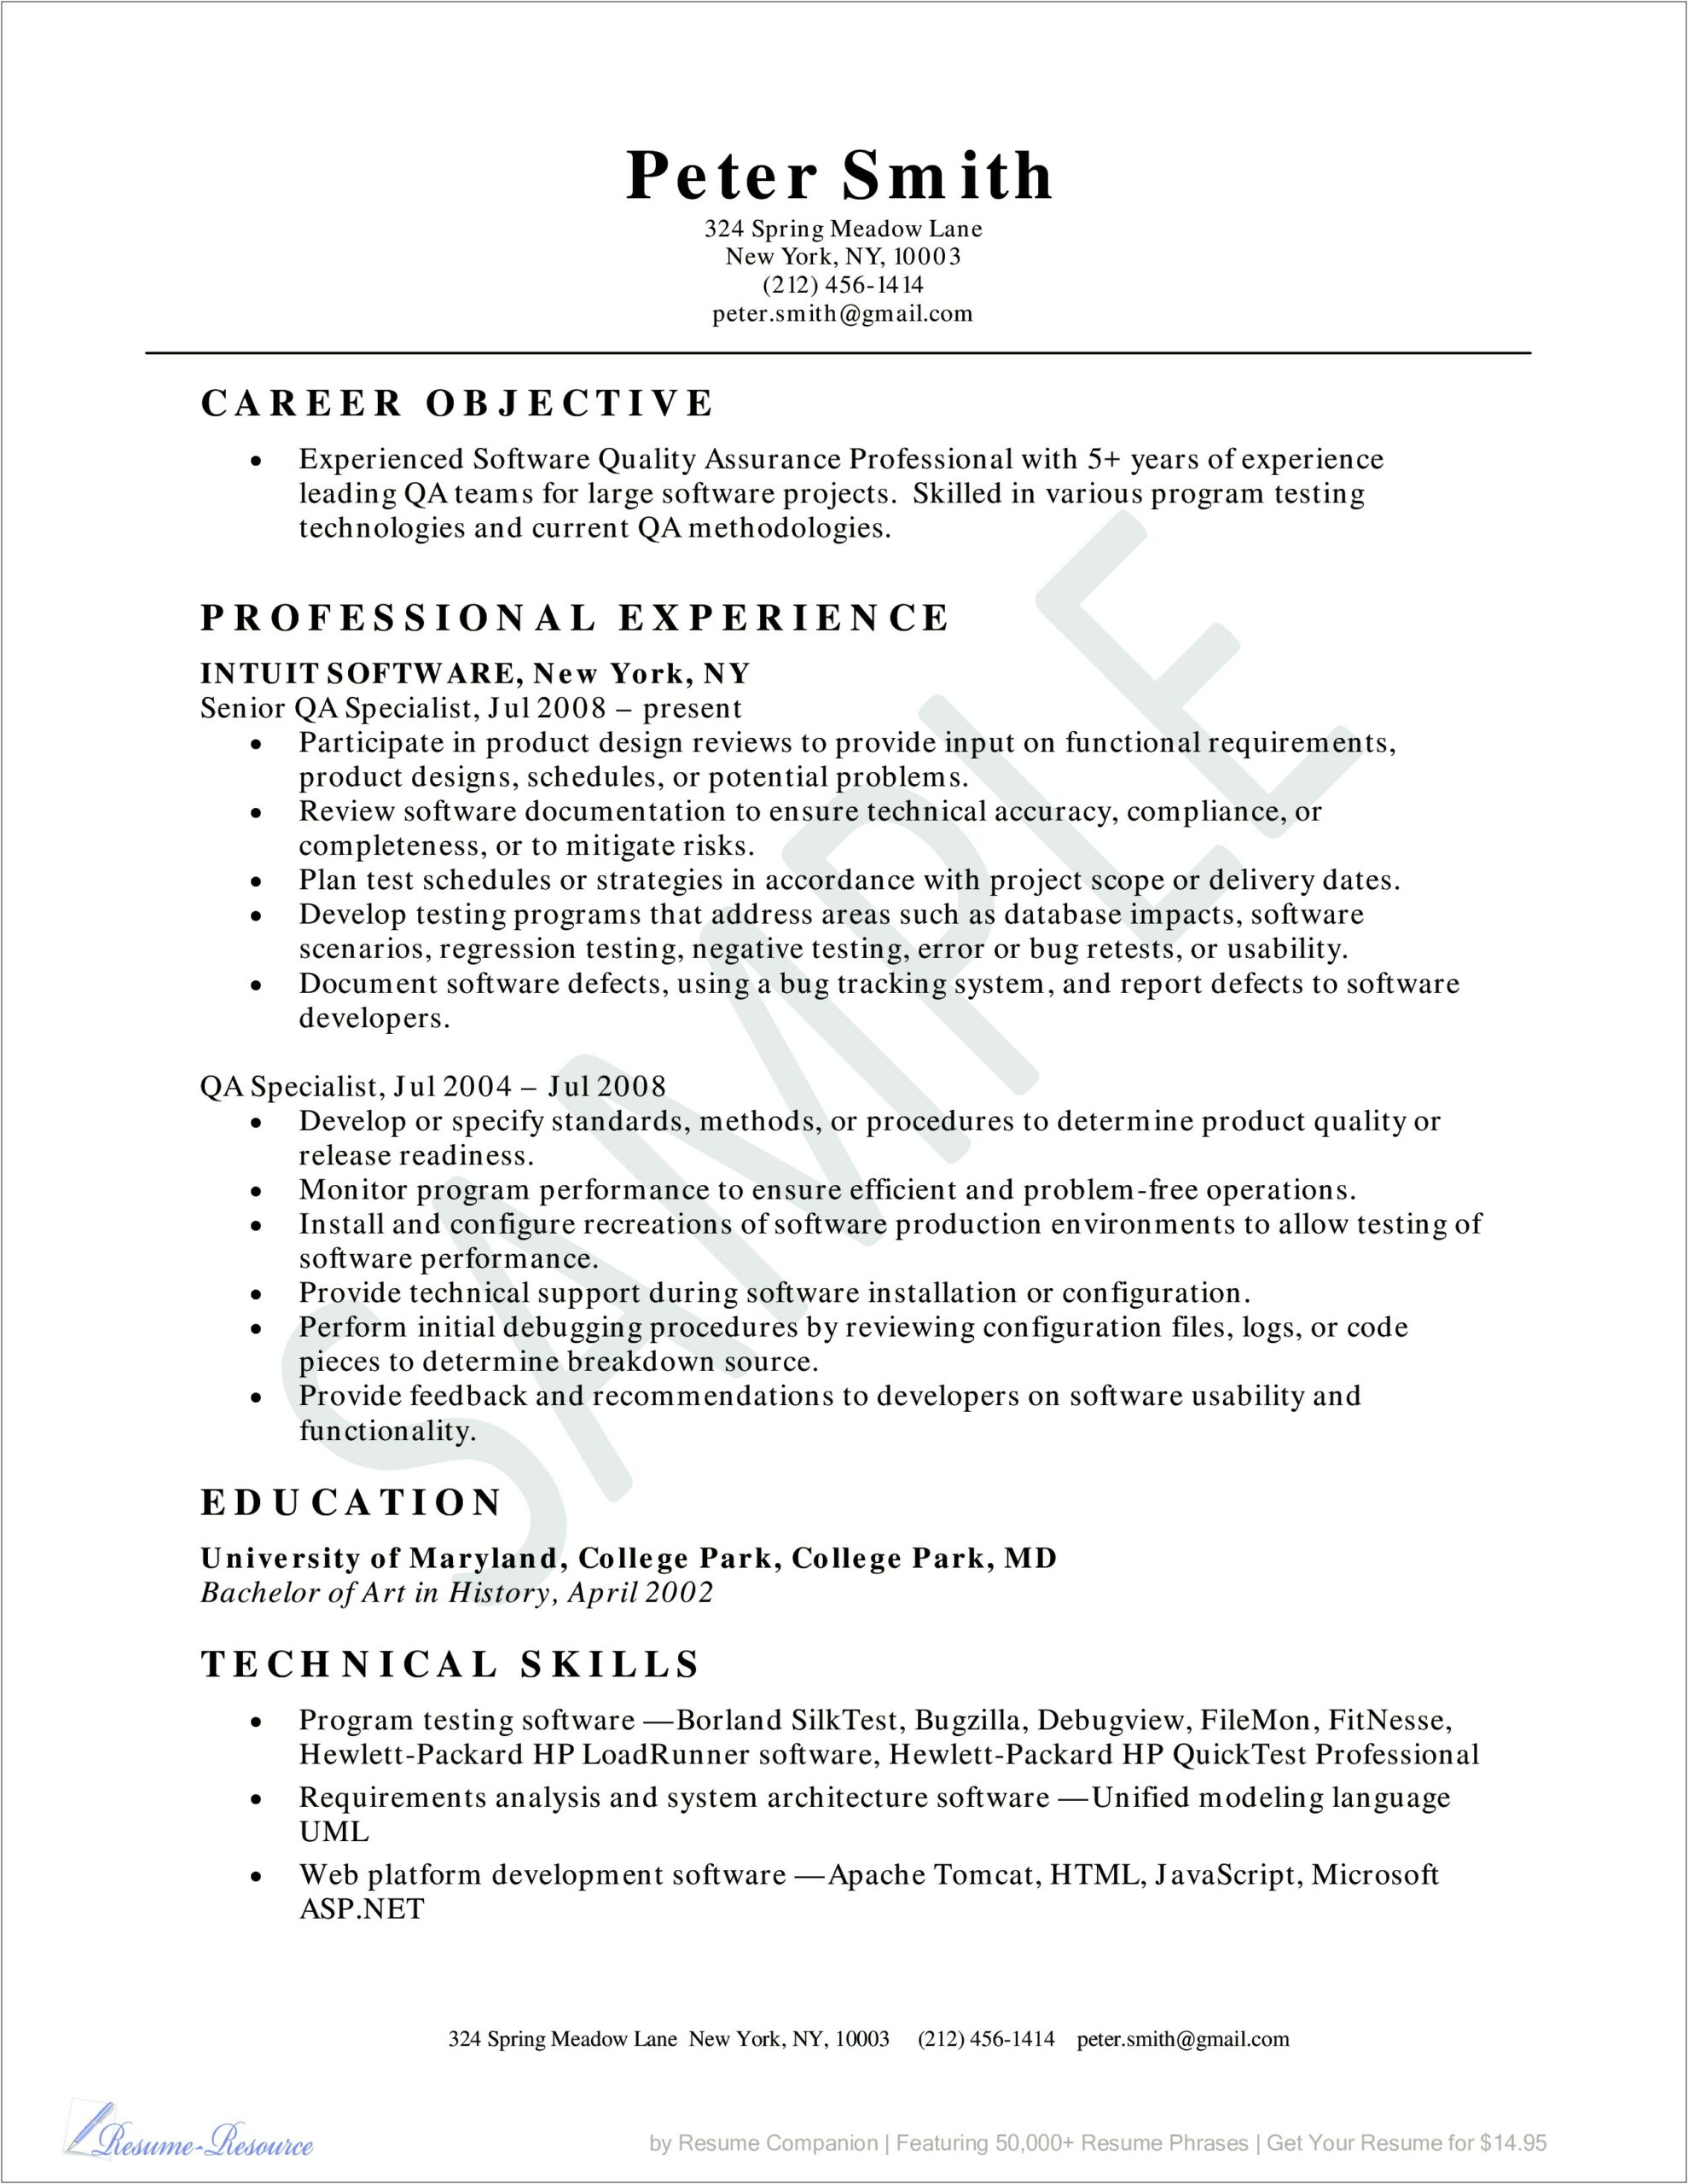 Resume Objective For Quality Assurance Manager